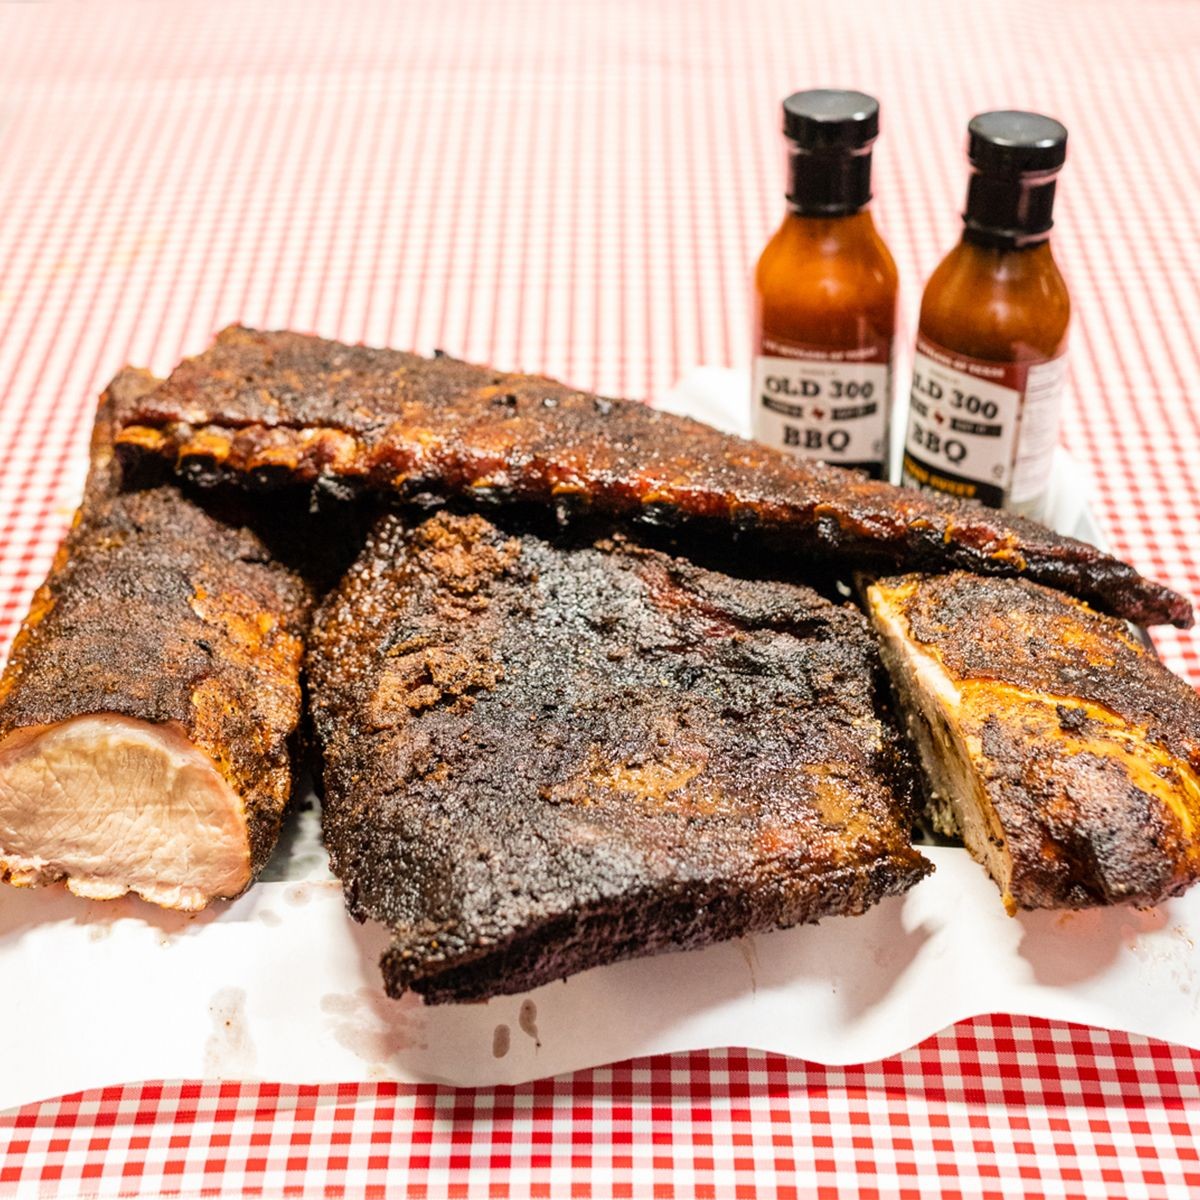 Angus trisket, ribs, pork loin and turkey, with sweet and spicy sauces from Old 300 BBQ